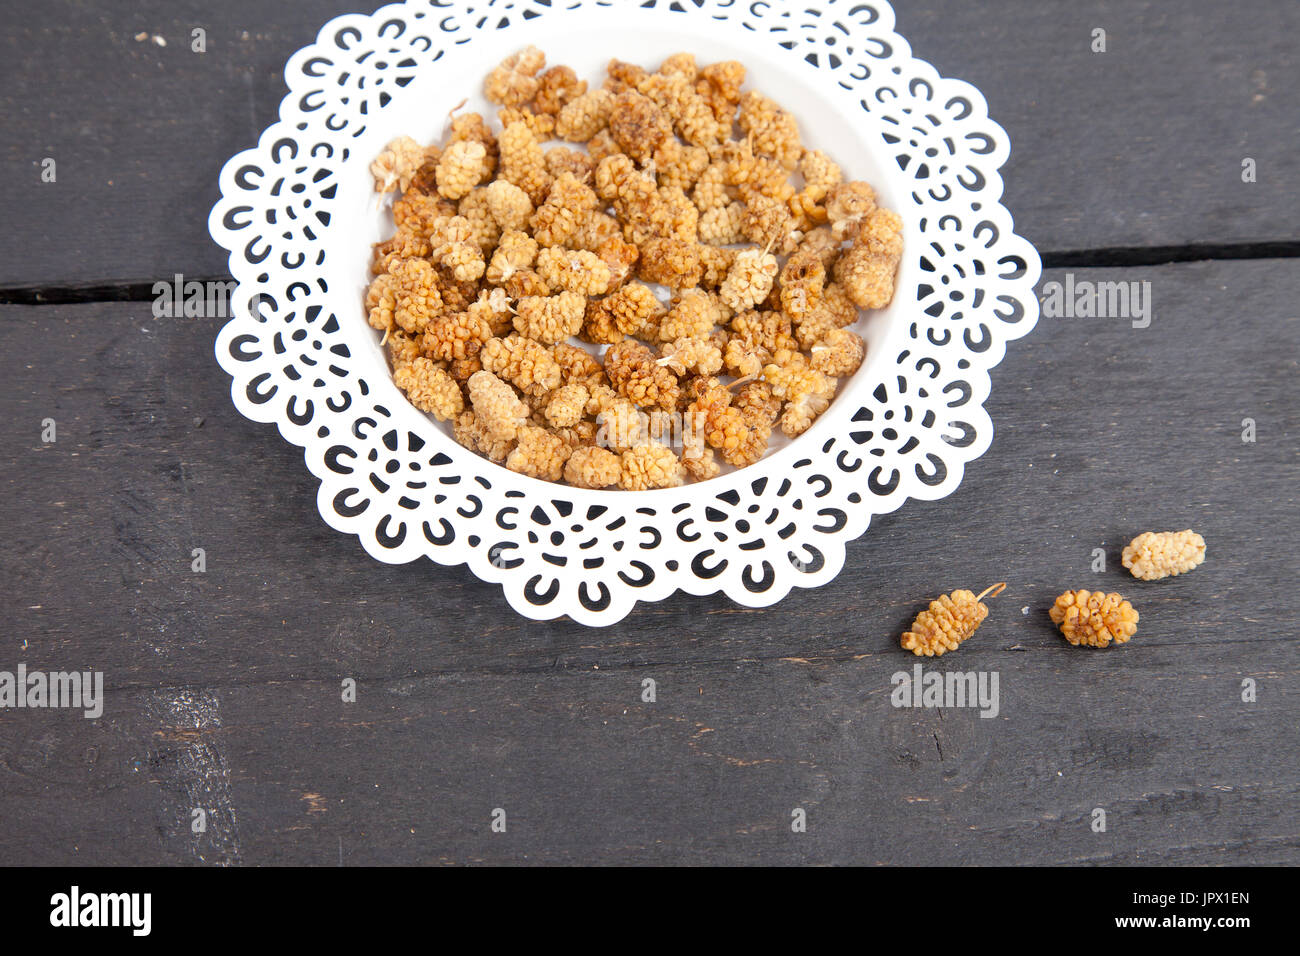 Dried mulberries on wooden background Stock Photo